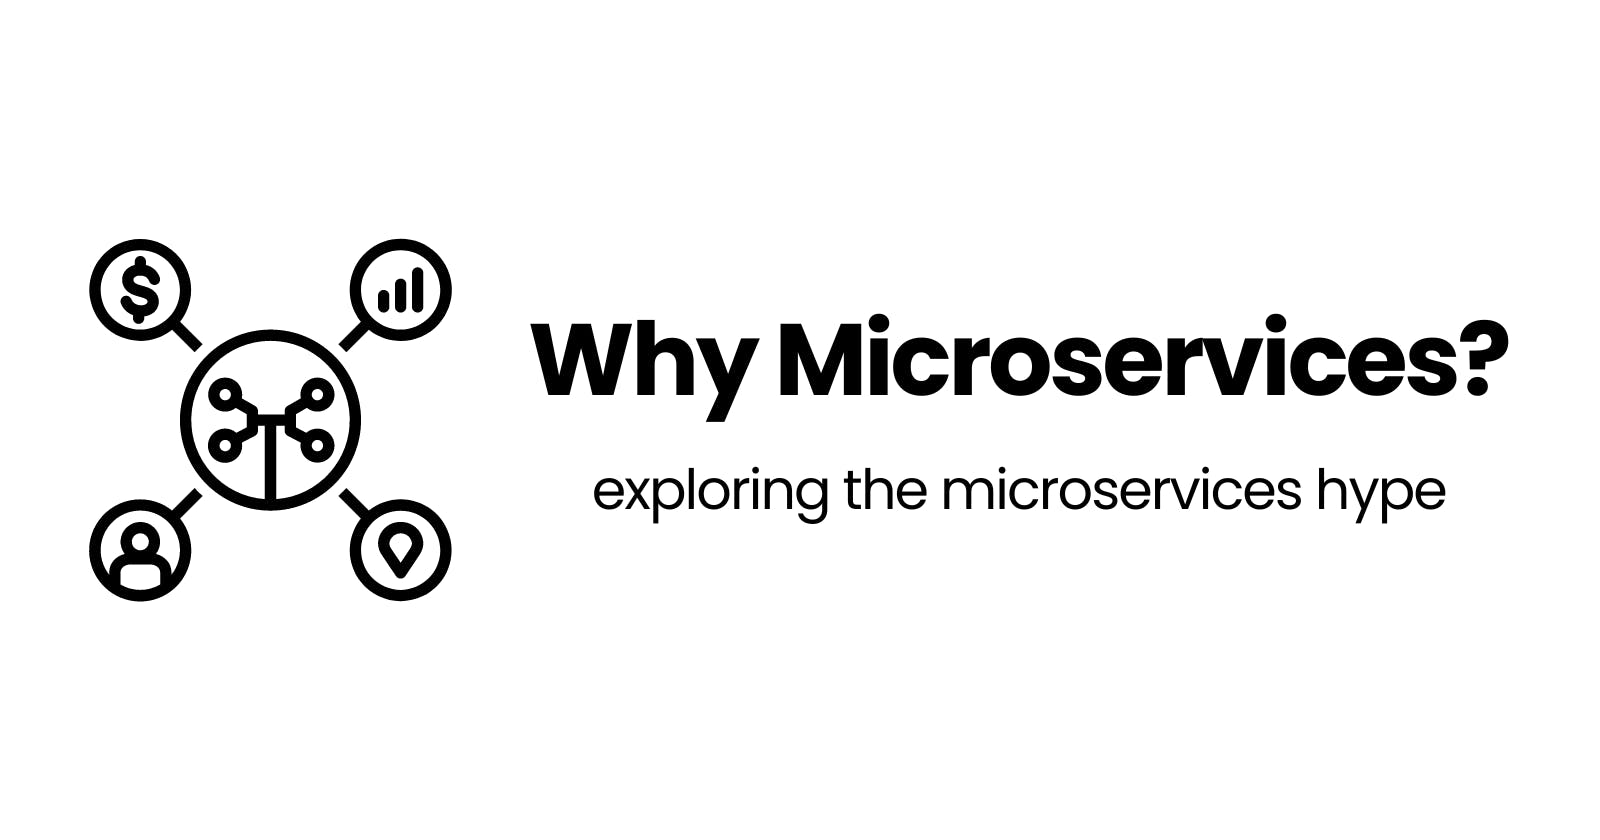 Why Microservices?